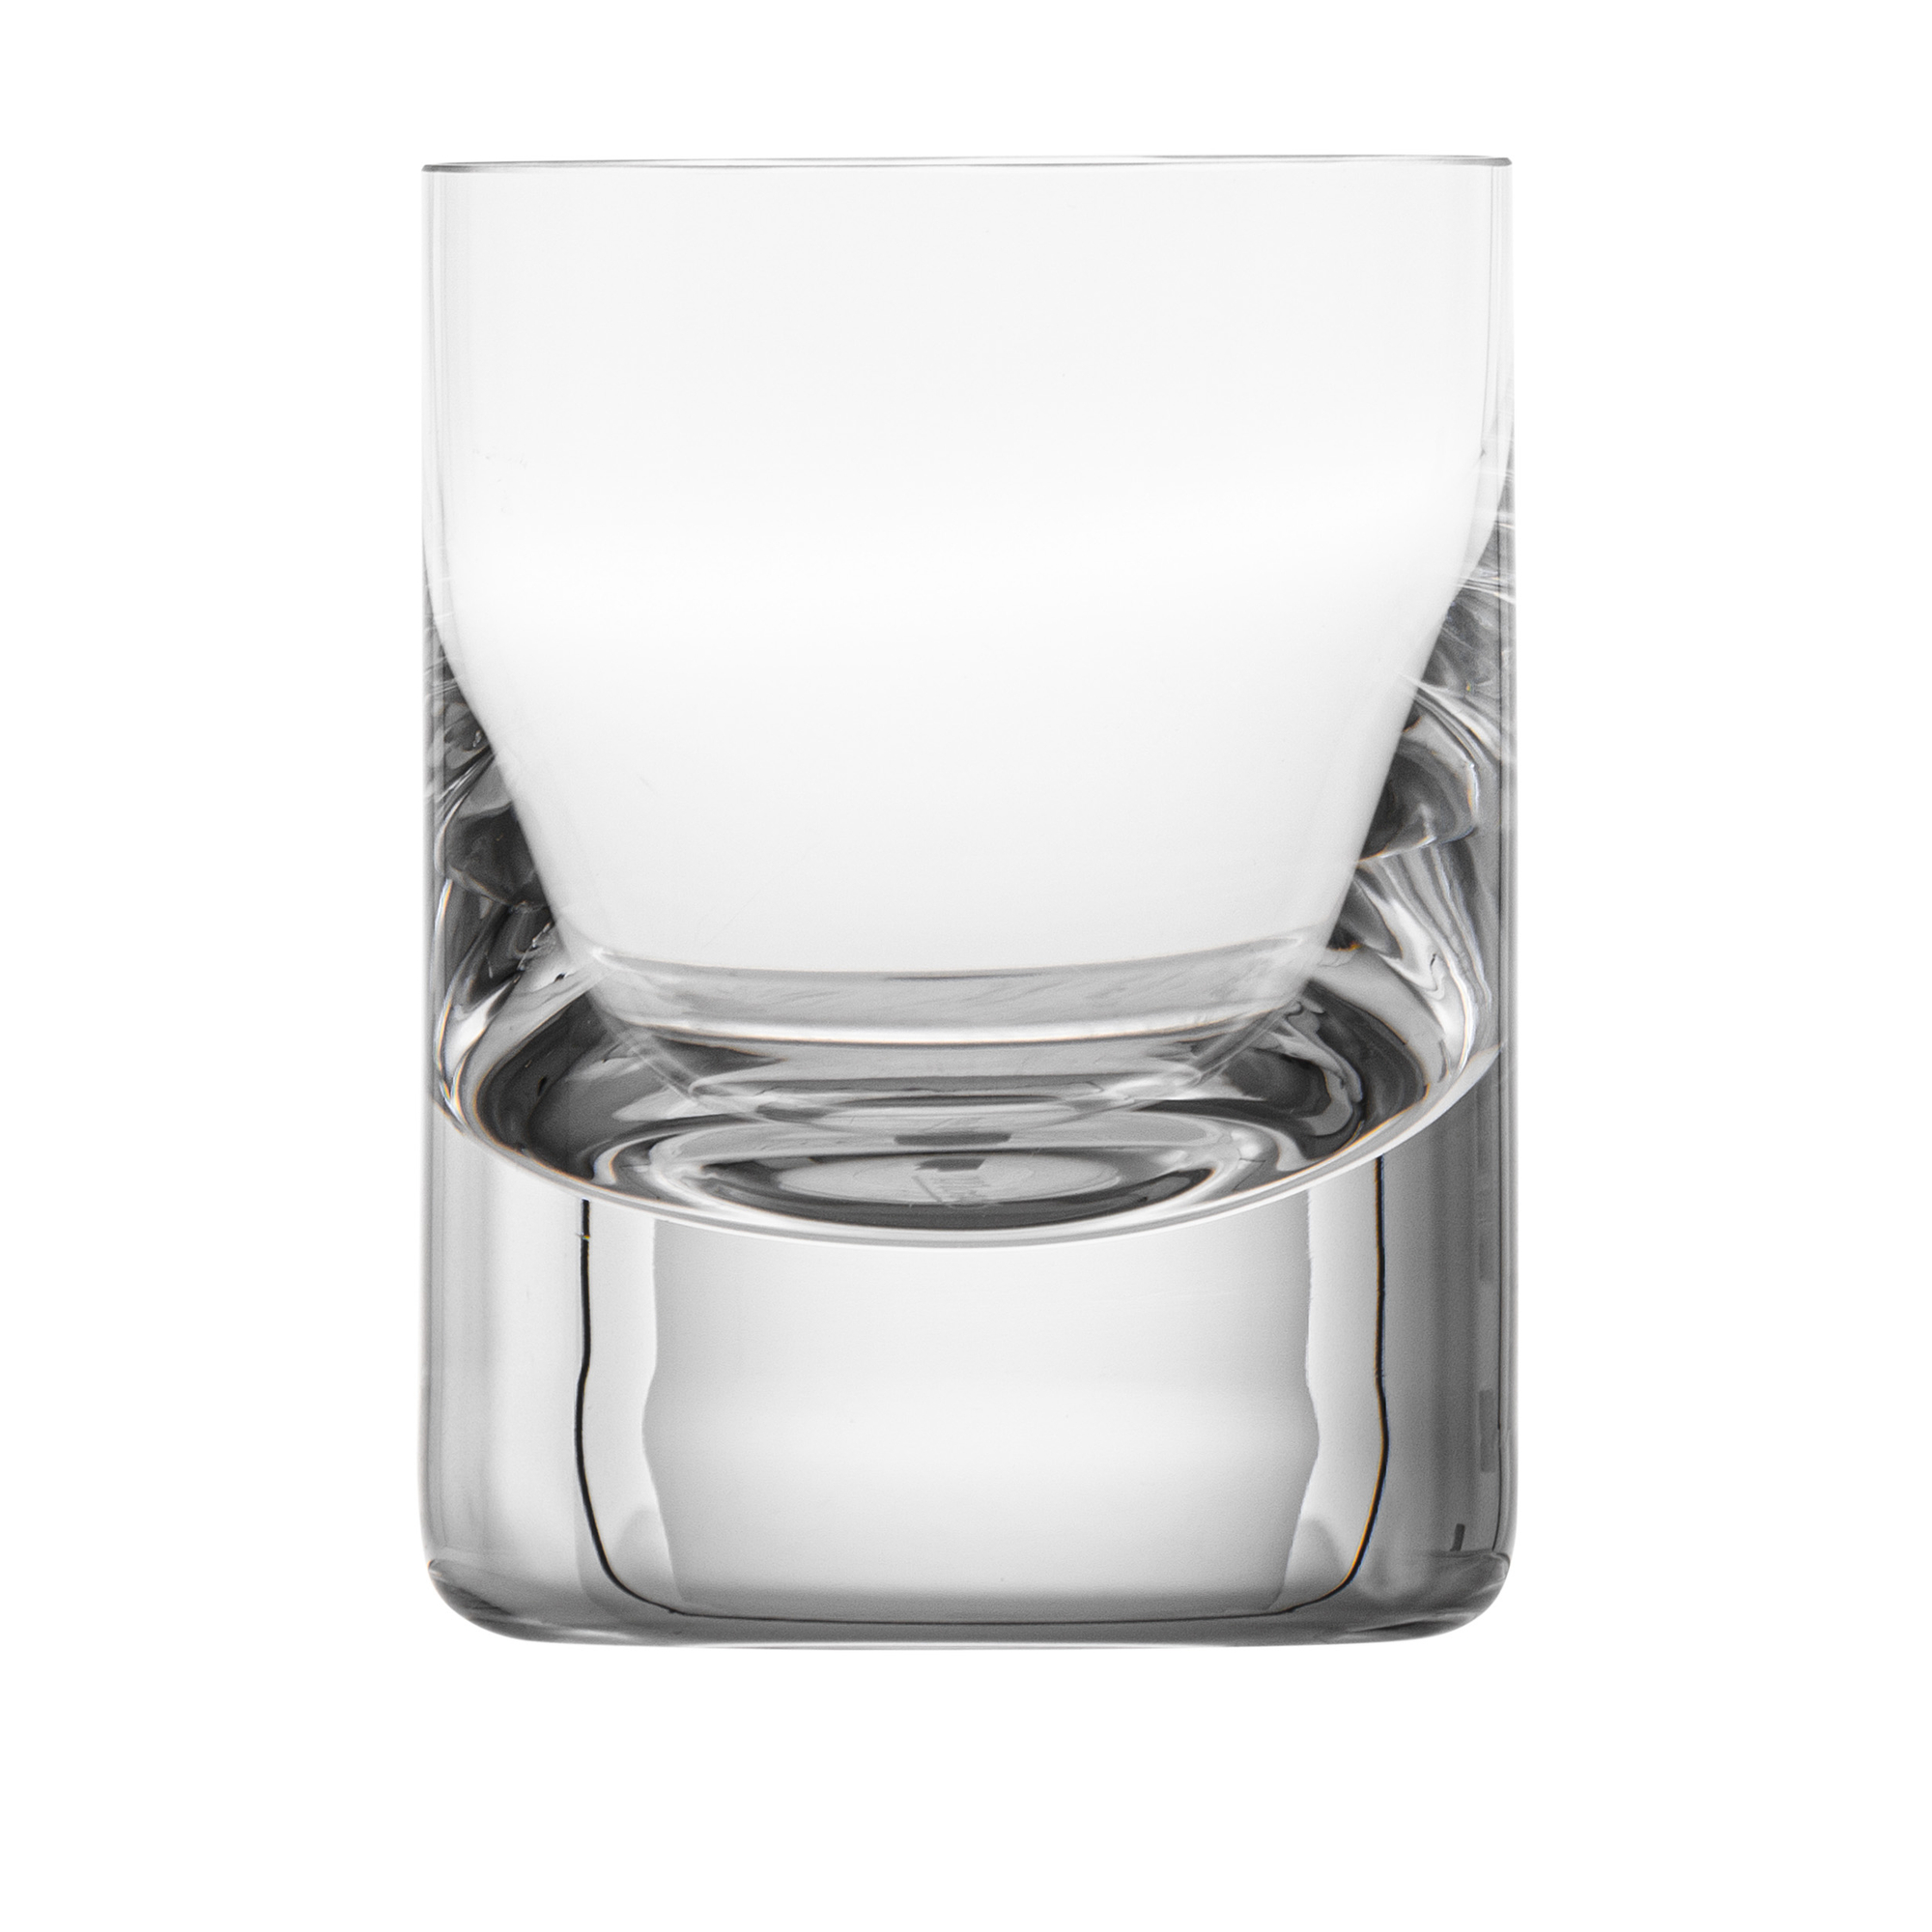 A whisky (shot) glass from Bohemian crystal by Moser